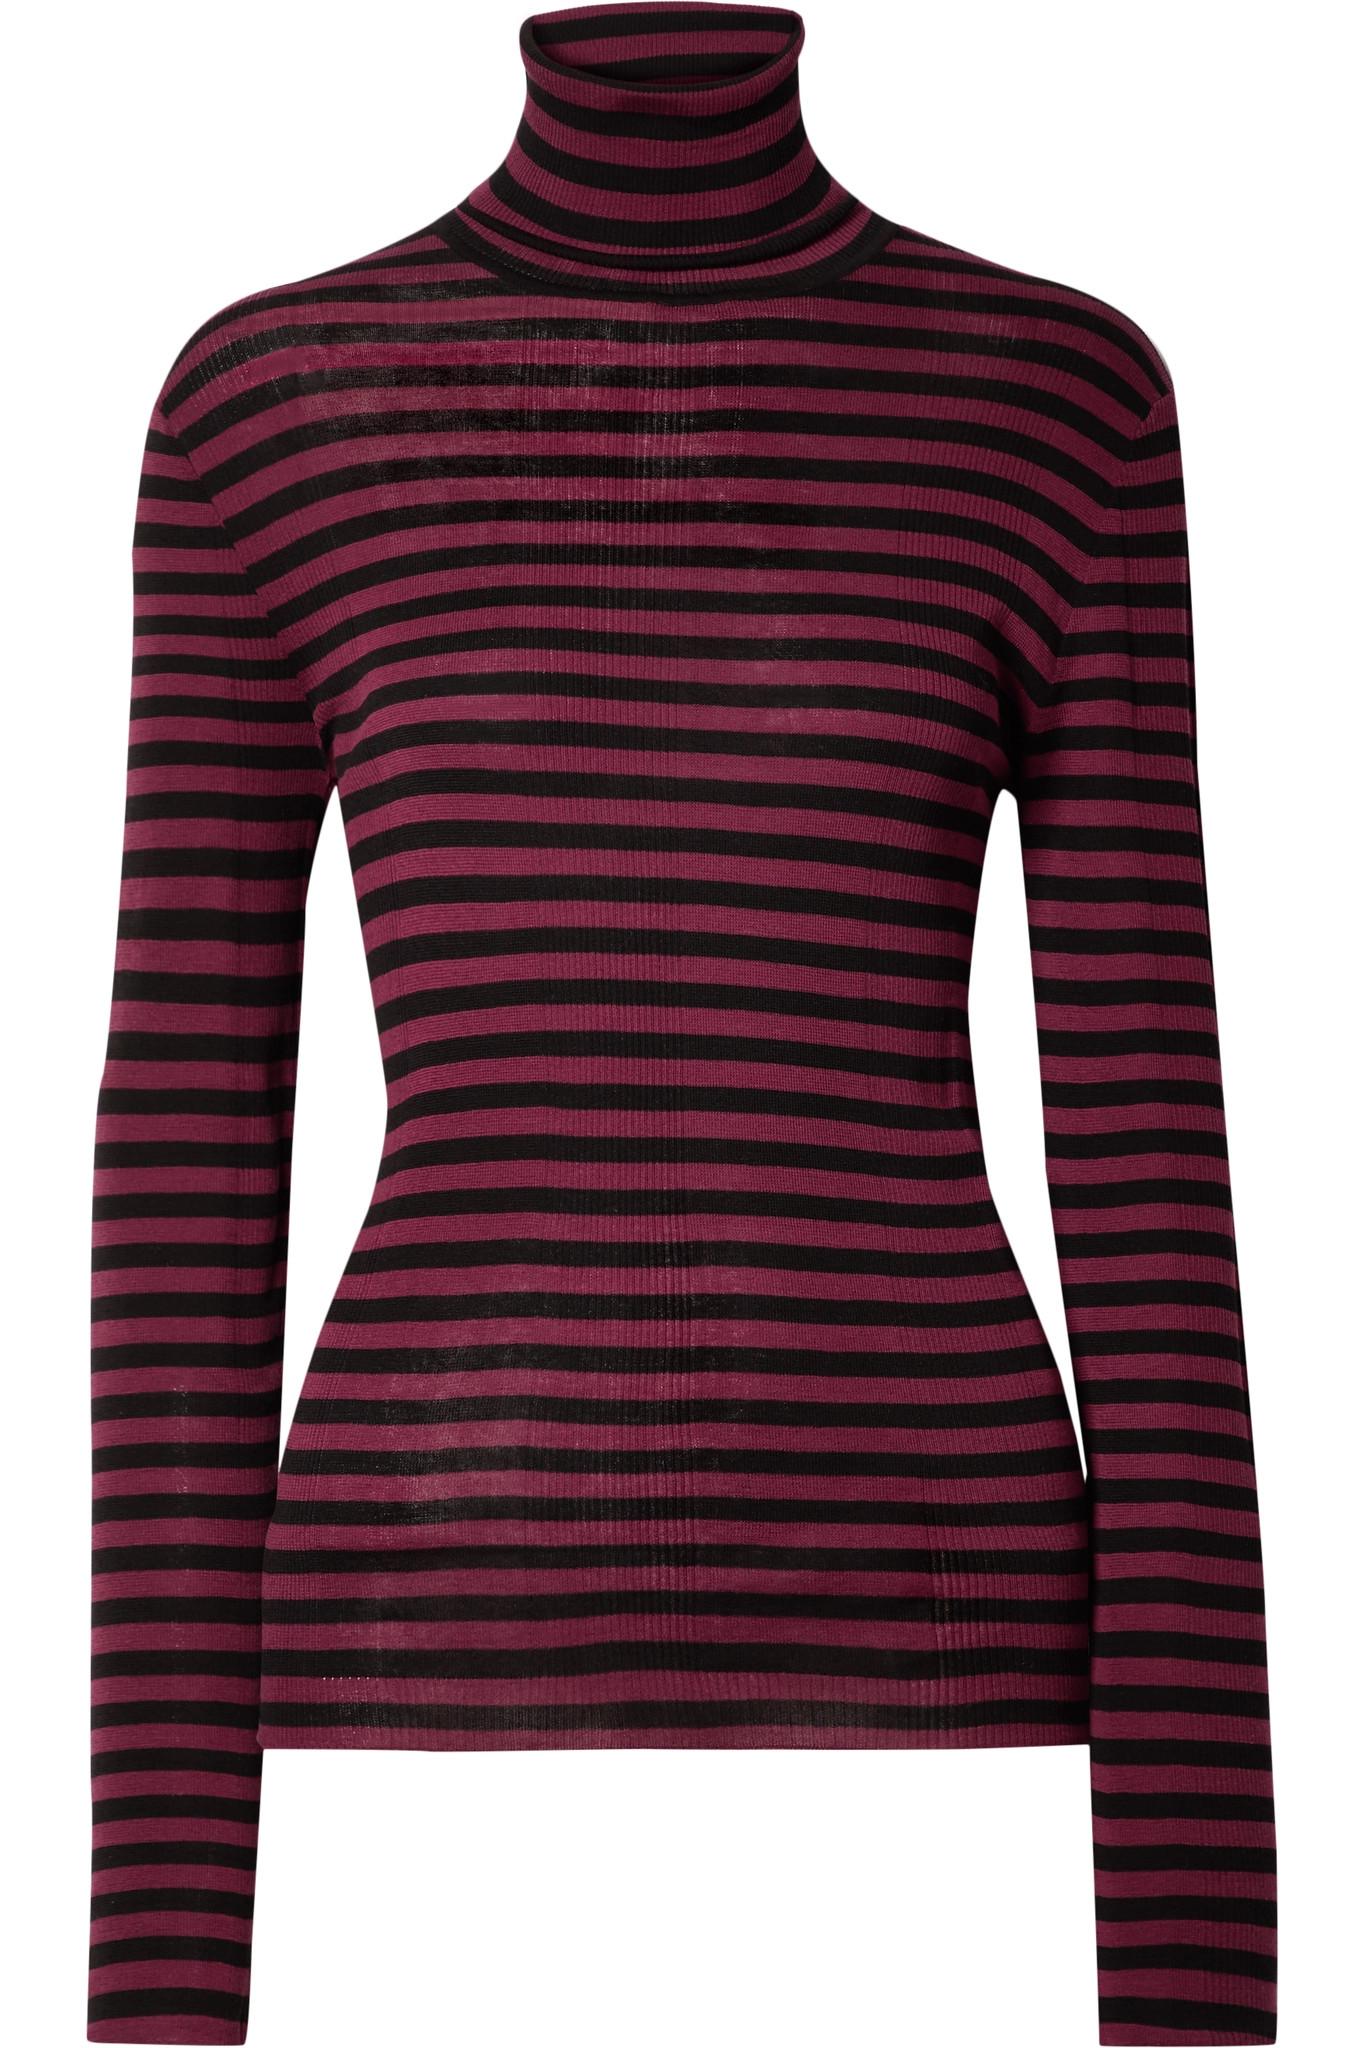 Lyst - Saint Laurent Striped Ribbed Cotton Turtleneck Sweater in Black